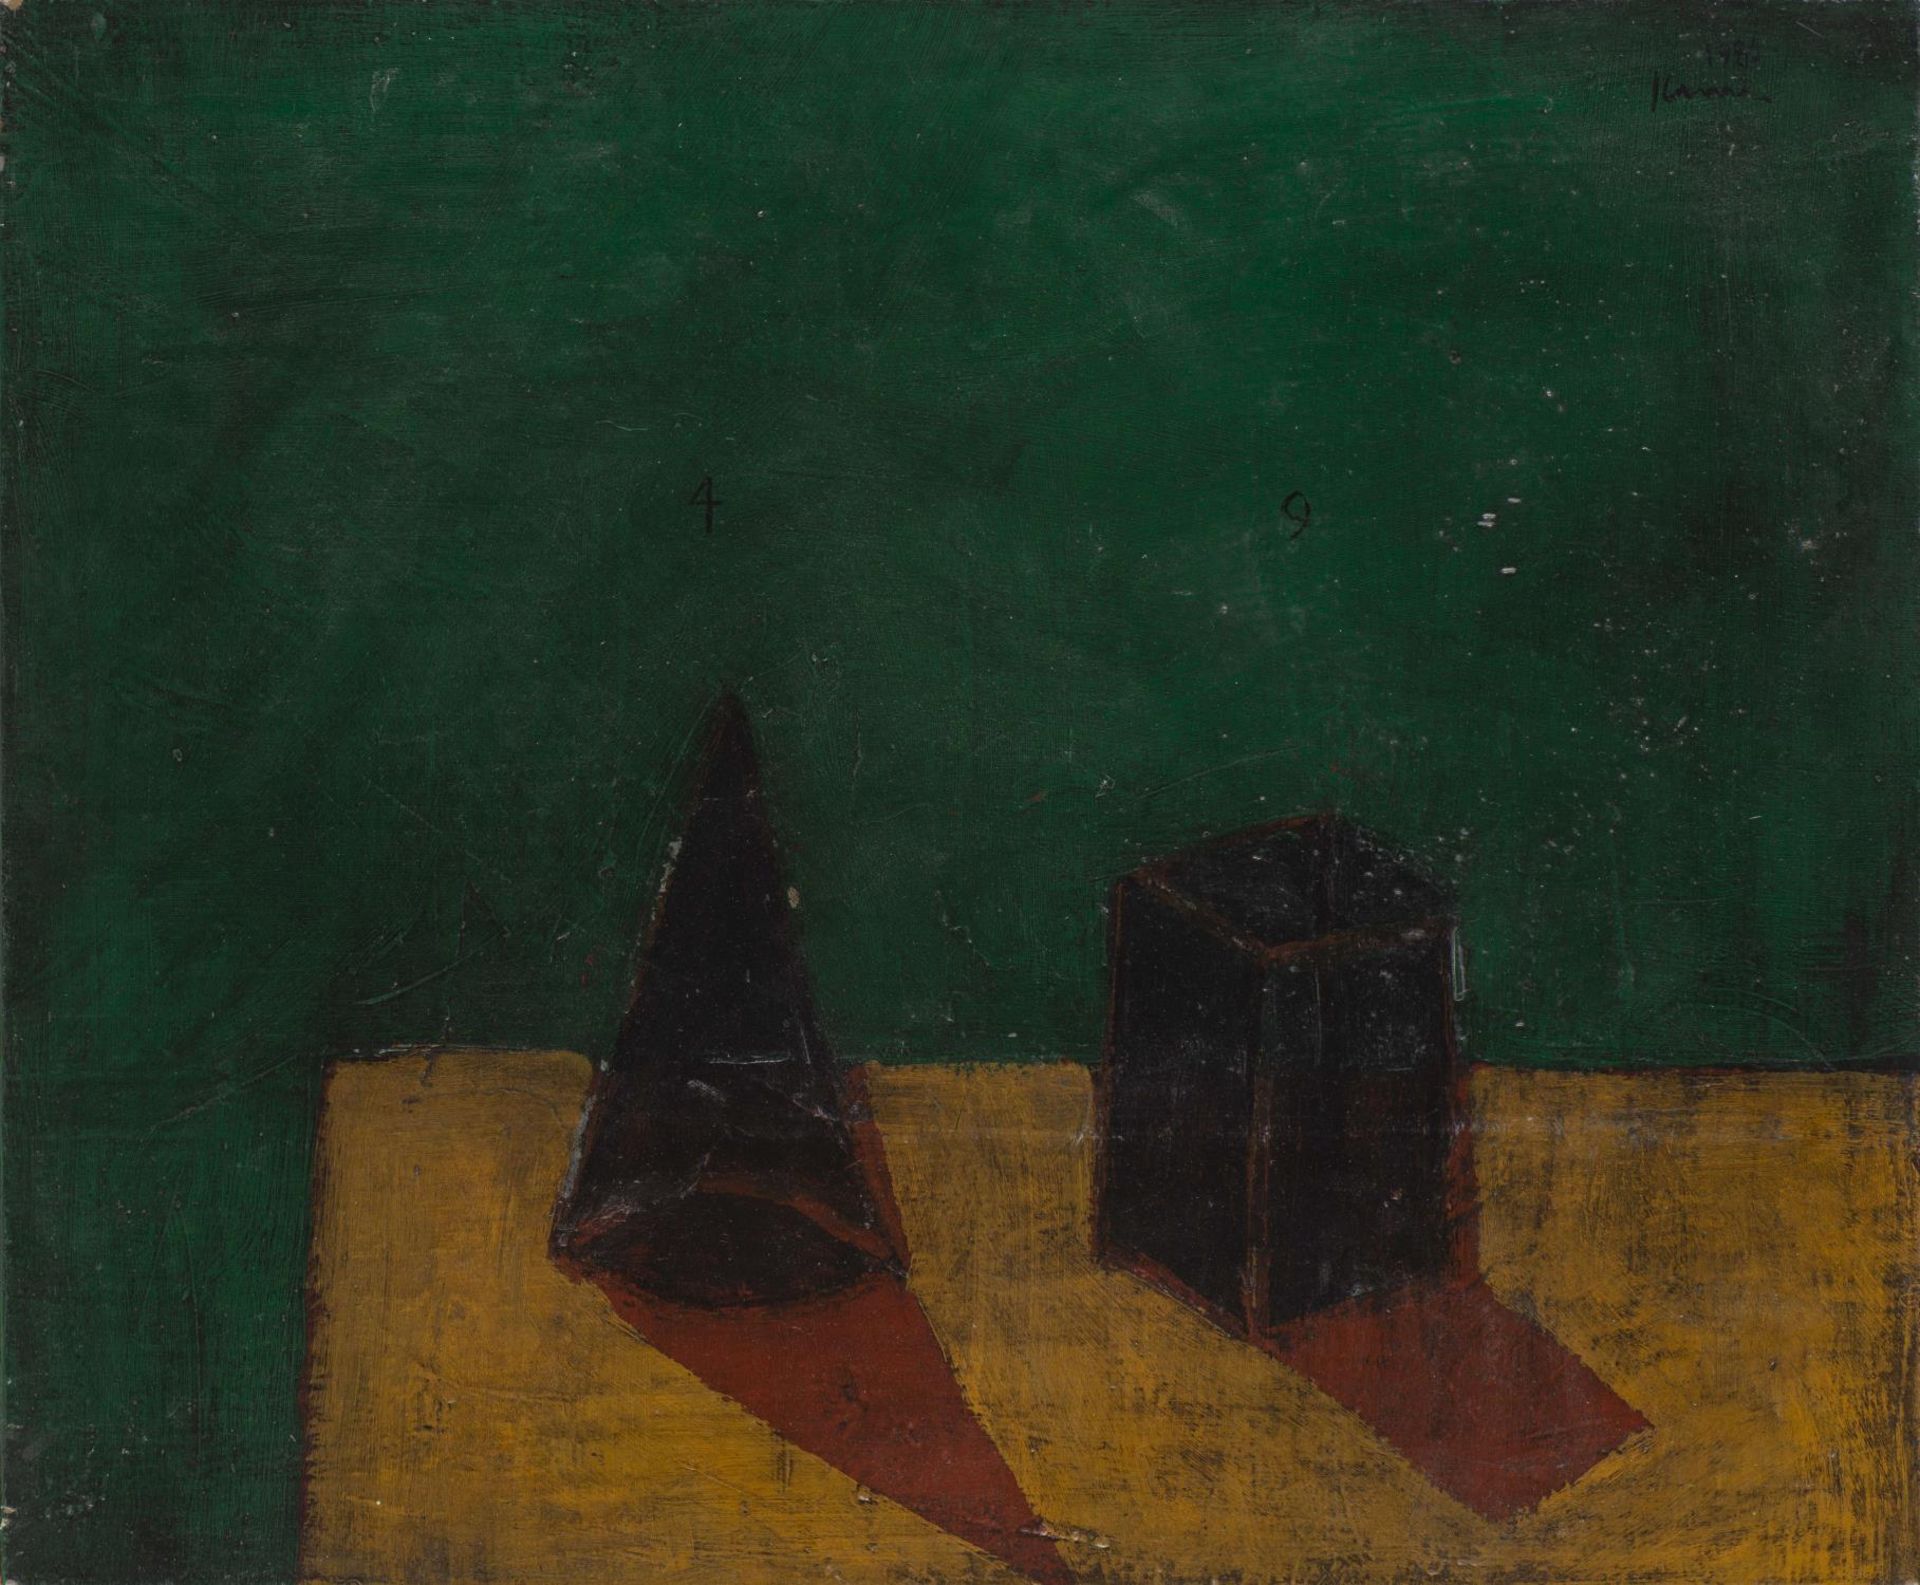 Charles KURRE (né en 1953), "Still life with objects n°4 & 9" - Image 3 of 14